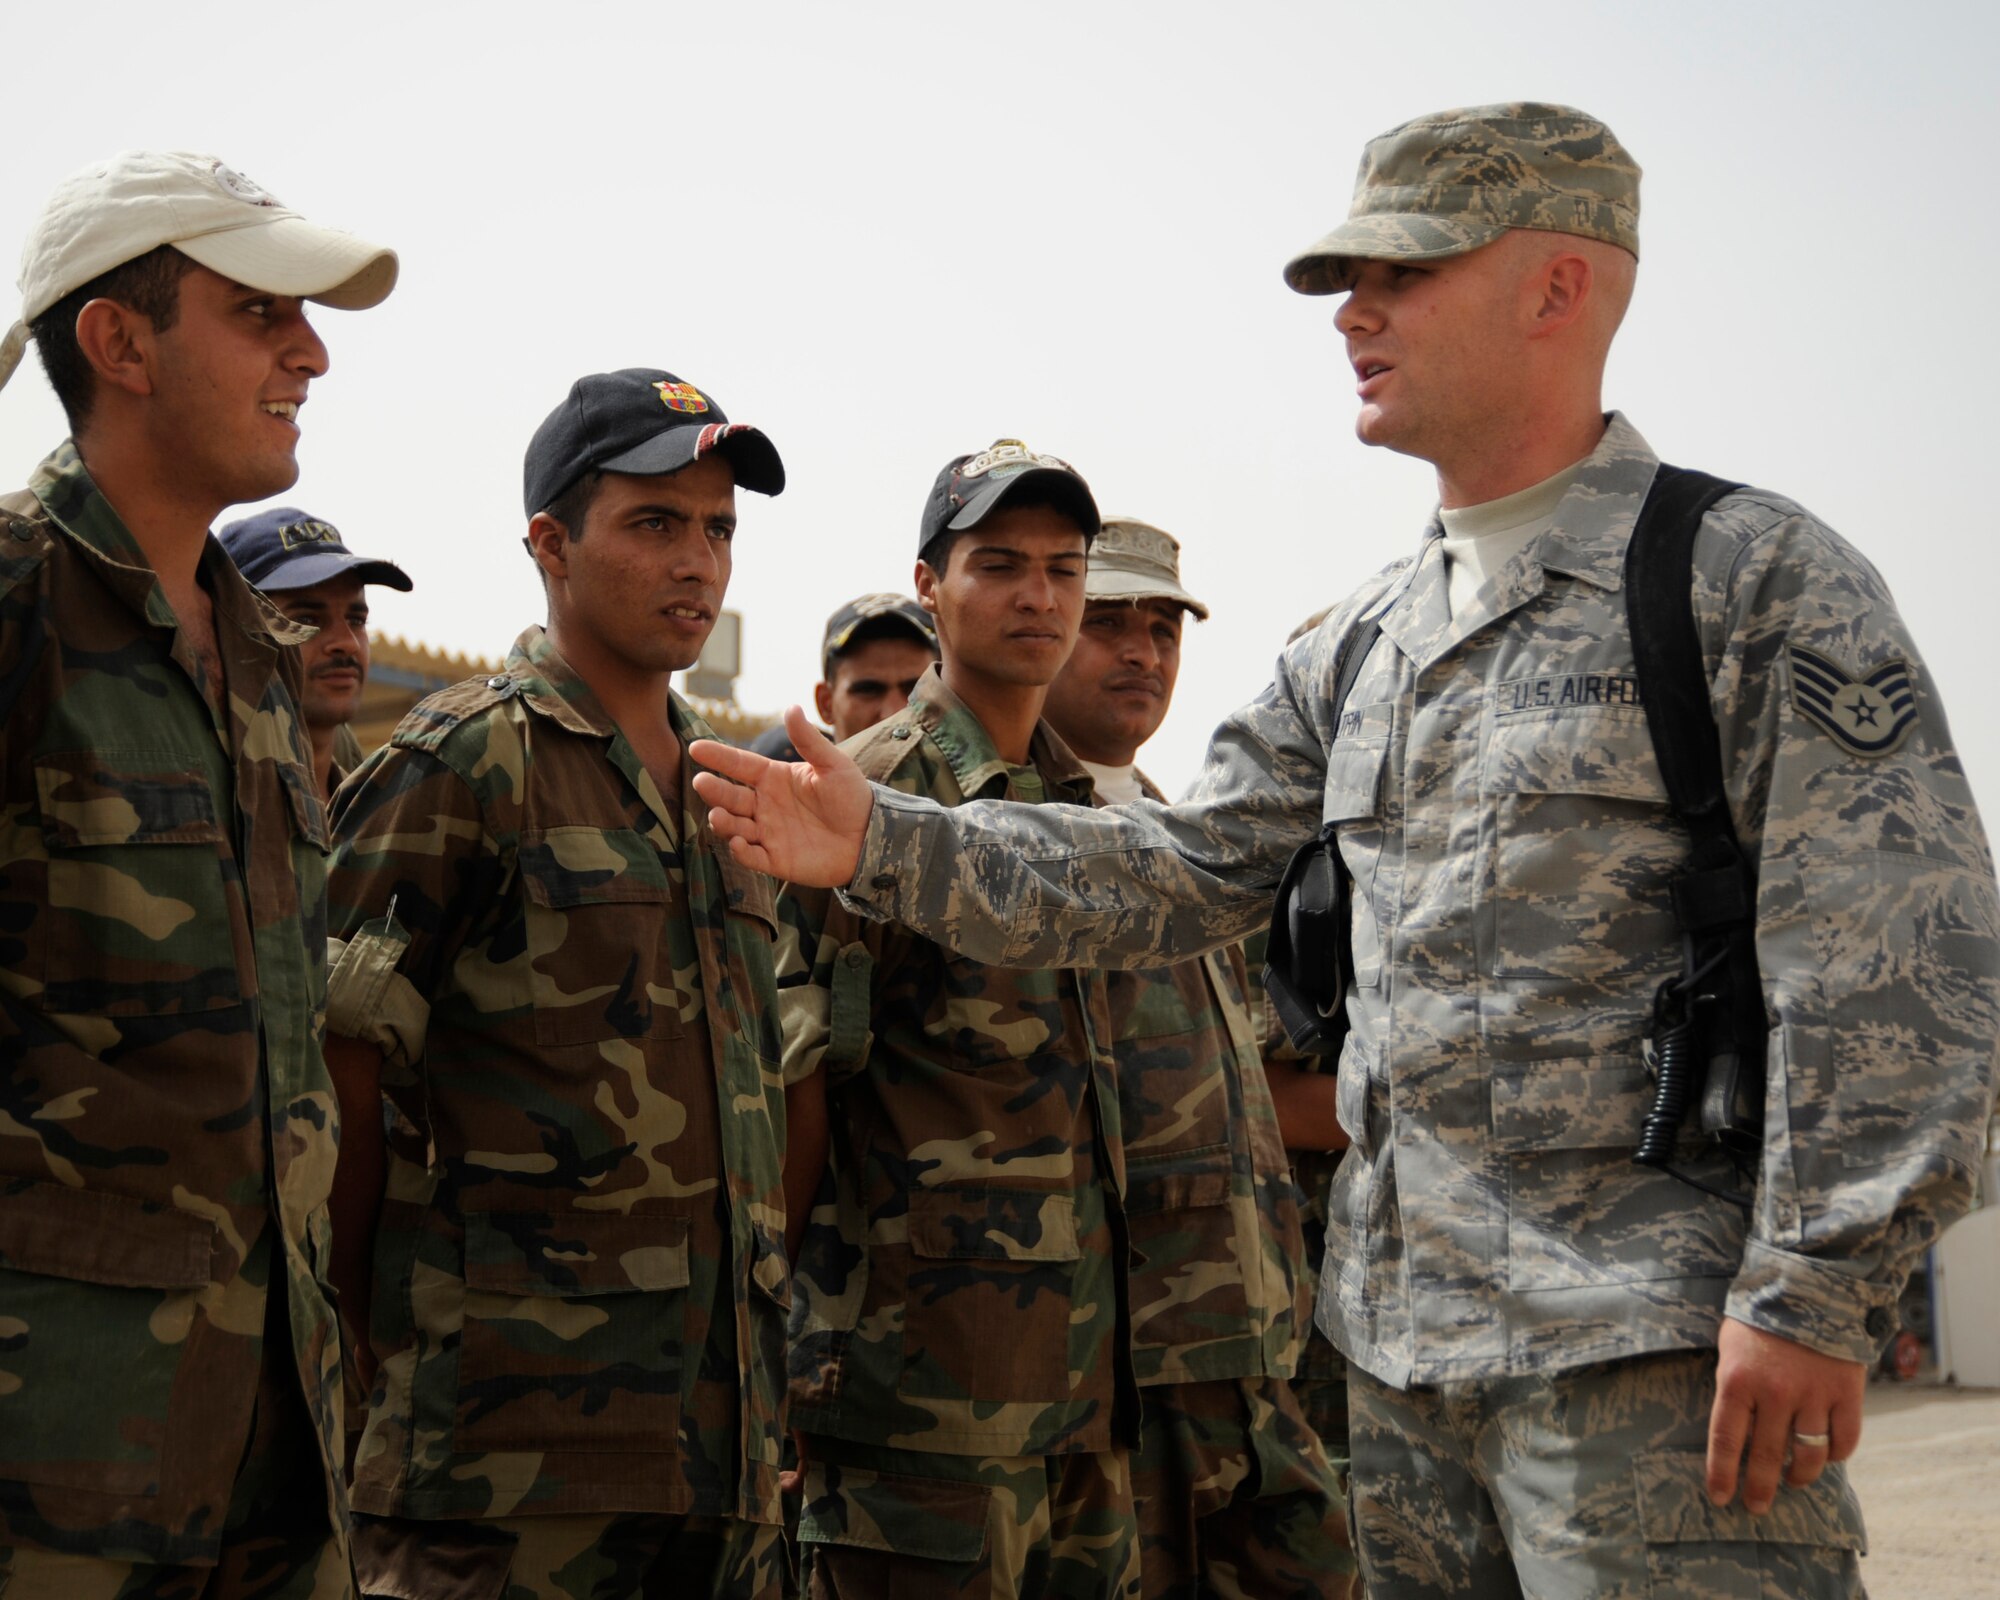 Staff Sgt. Matthew Coltrin, former Air Force Basic Military Training Instructor, deployed to Iraq as an Air Advisor in 2008. Now a master sergeant, Coltrin is the 509th Medical Group first sergeant at Whiteman Air Force Base, Mo. (Courtesy Photo)